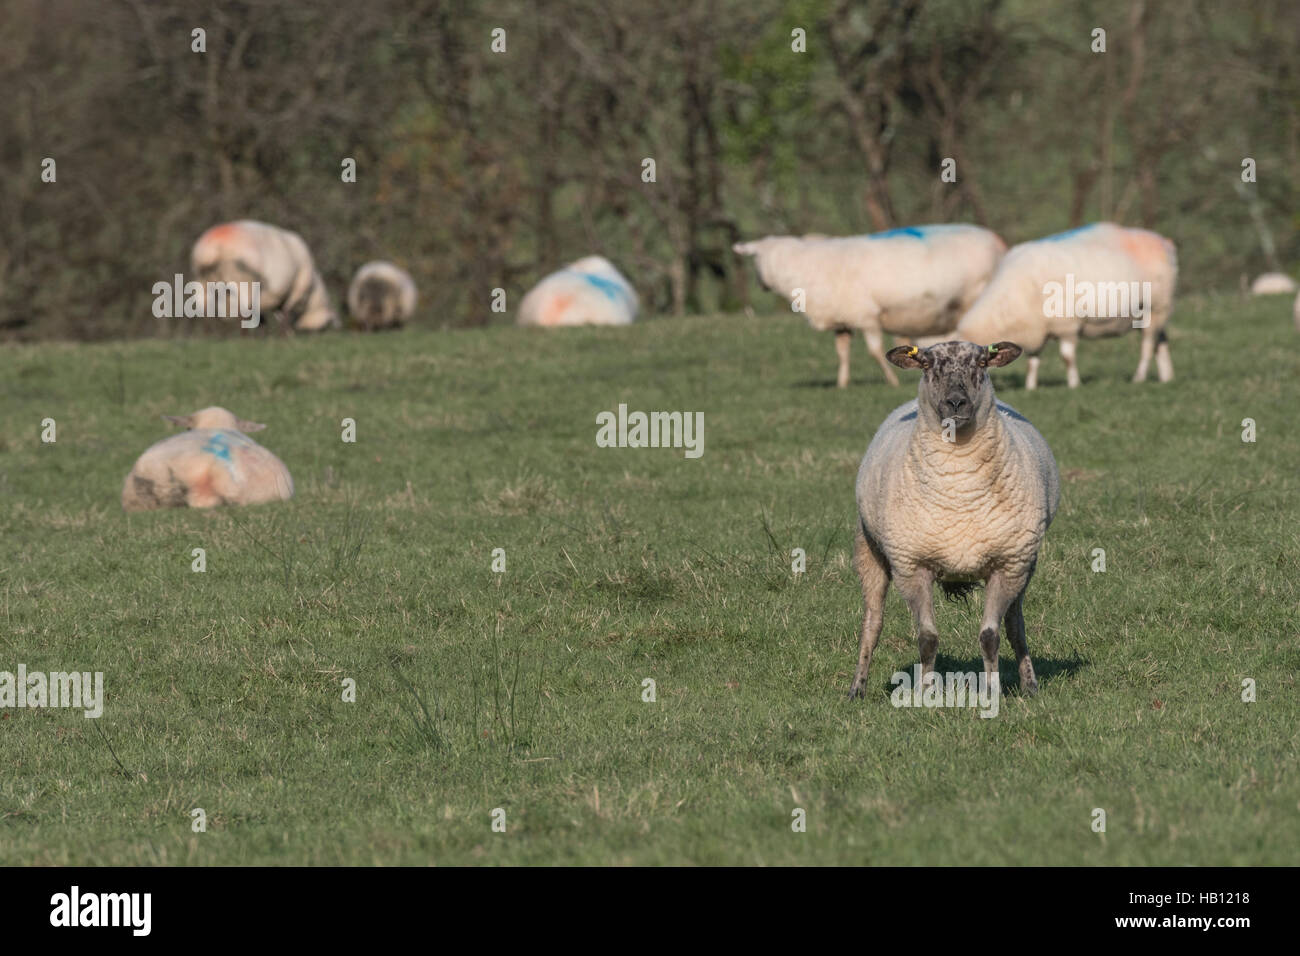 Small part of a flock of Texel-Suffolk crossed sheep. As potential metaphor for herd instinct, sheep-like, customers, food, and herd mentality. Stock Photo